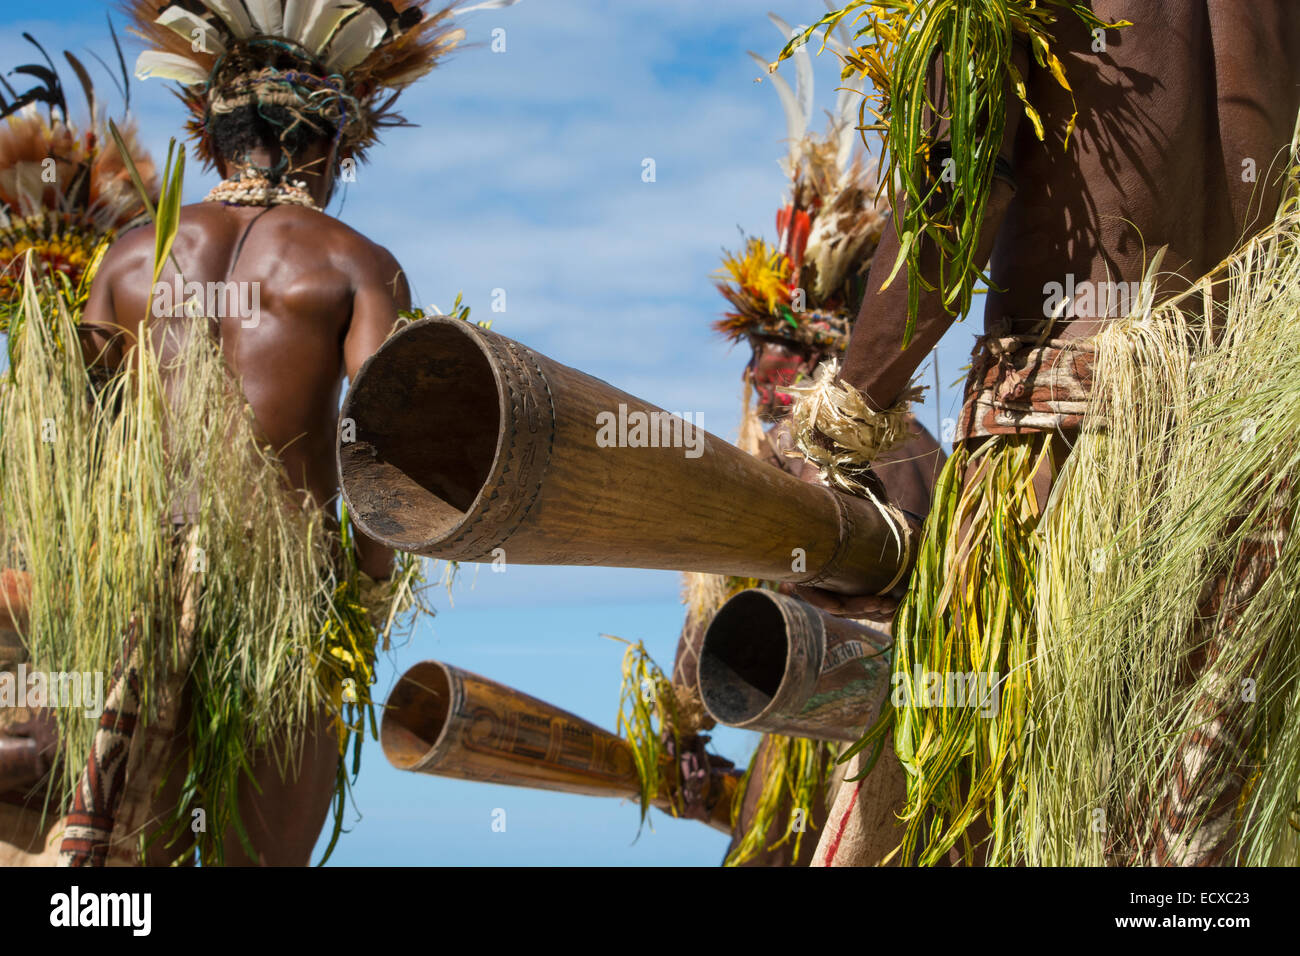 Papua New Guinea, Tufi. Traditional sing-sing, men with drums dressed in native attire. Men in costume with wooden drums. Stock Photo